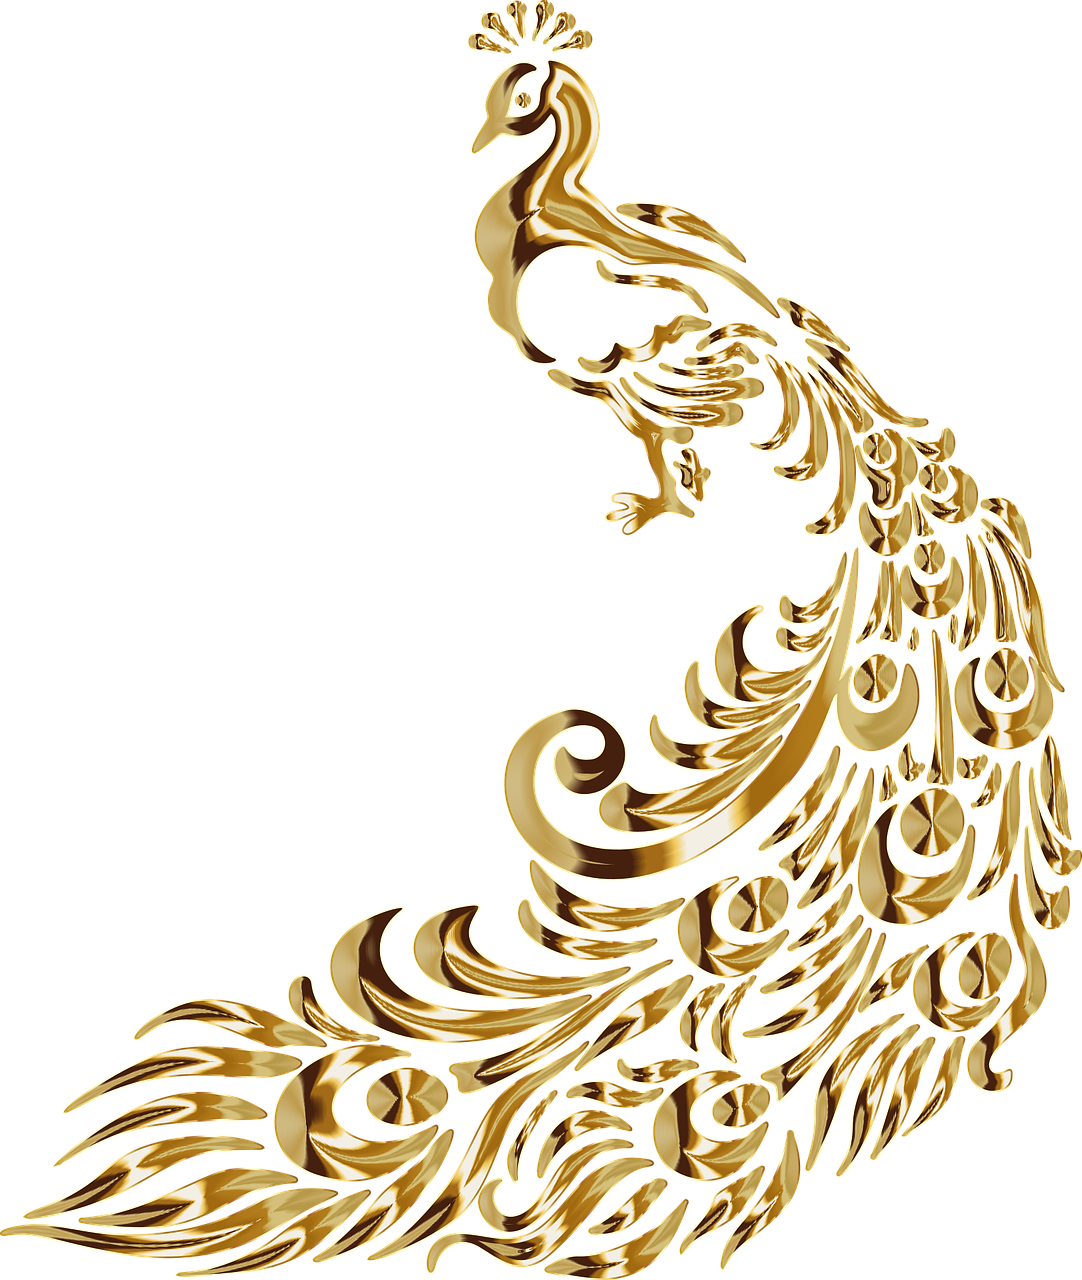 a stylized golden peacock, with a red center